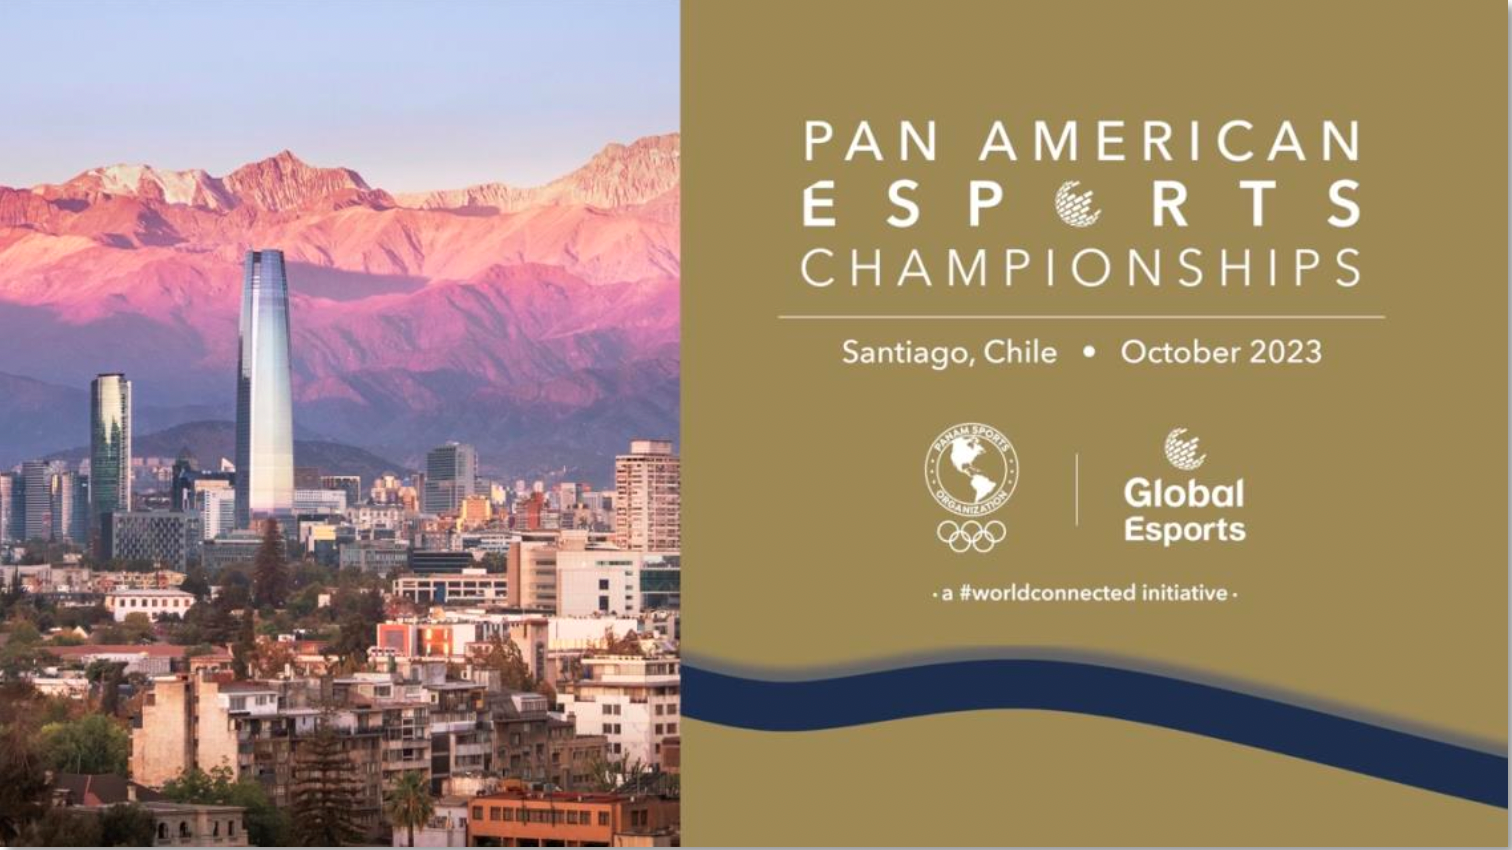 An esports event will be held alongside the Santiago 2023 Pan American Games ©GEF/Panam Sports